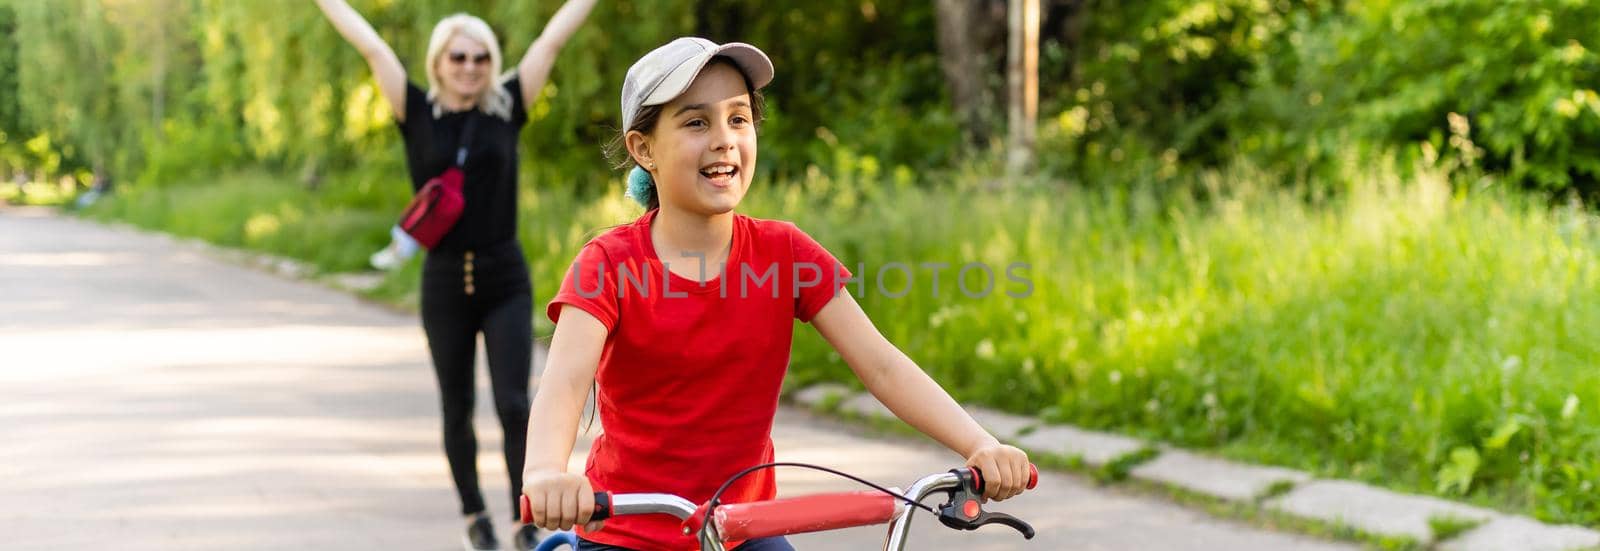 Beautiful young mother teaching her daughter to ride a bicycle. Both smiling, summer park in background, active family concept.